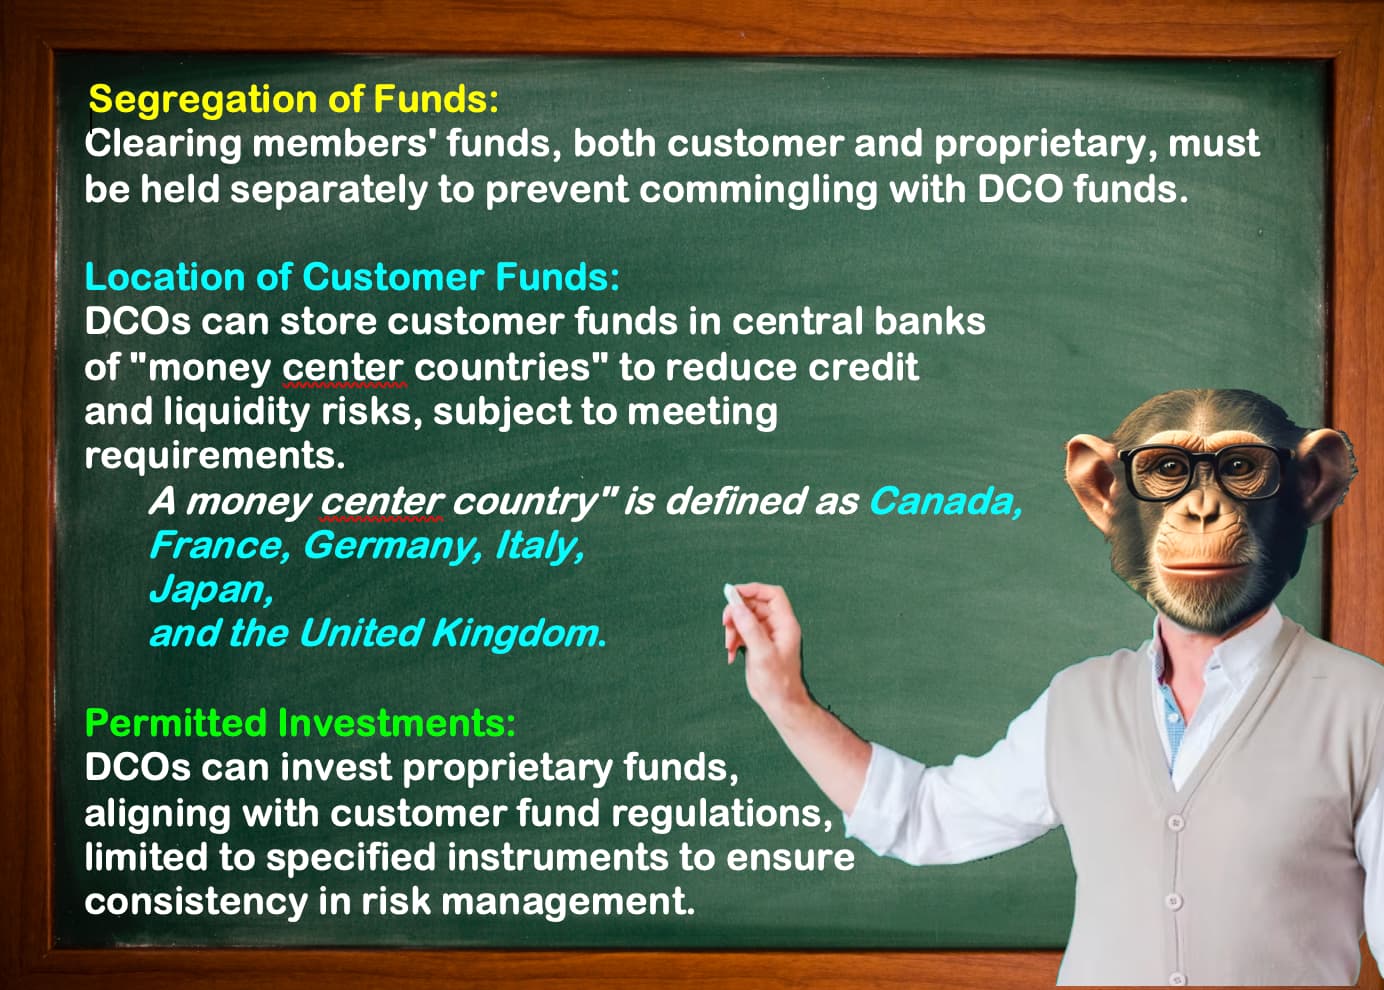 IMAGE - RECAPPING MAIN POINTS INCLUDING SEGREGATION OF FUNDS, LOCATION OF CUSTOMER FUNDS AND PERMITTED INVESTMENTS.